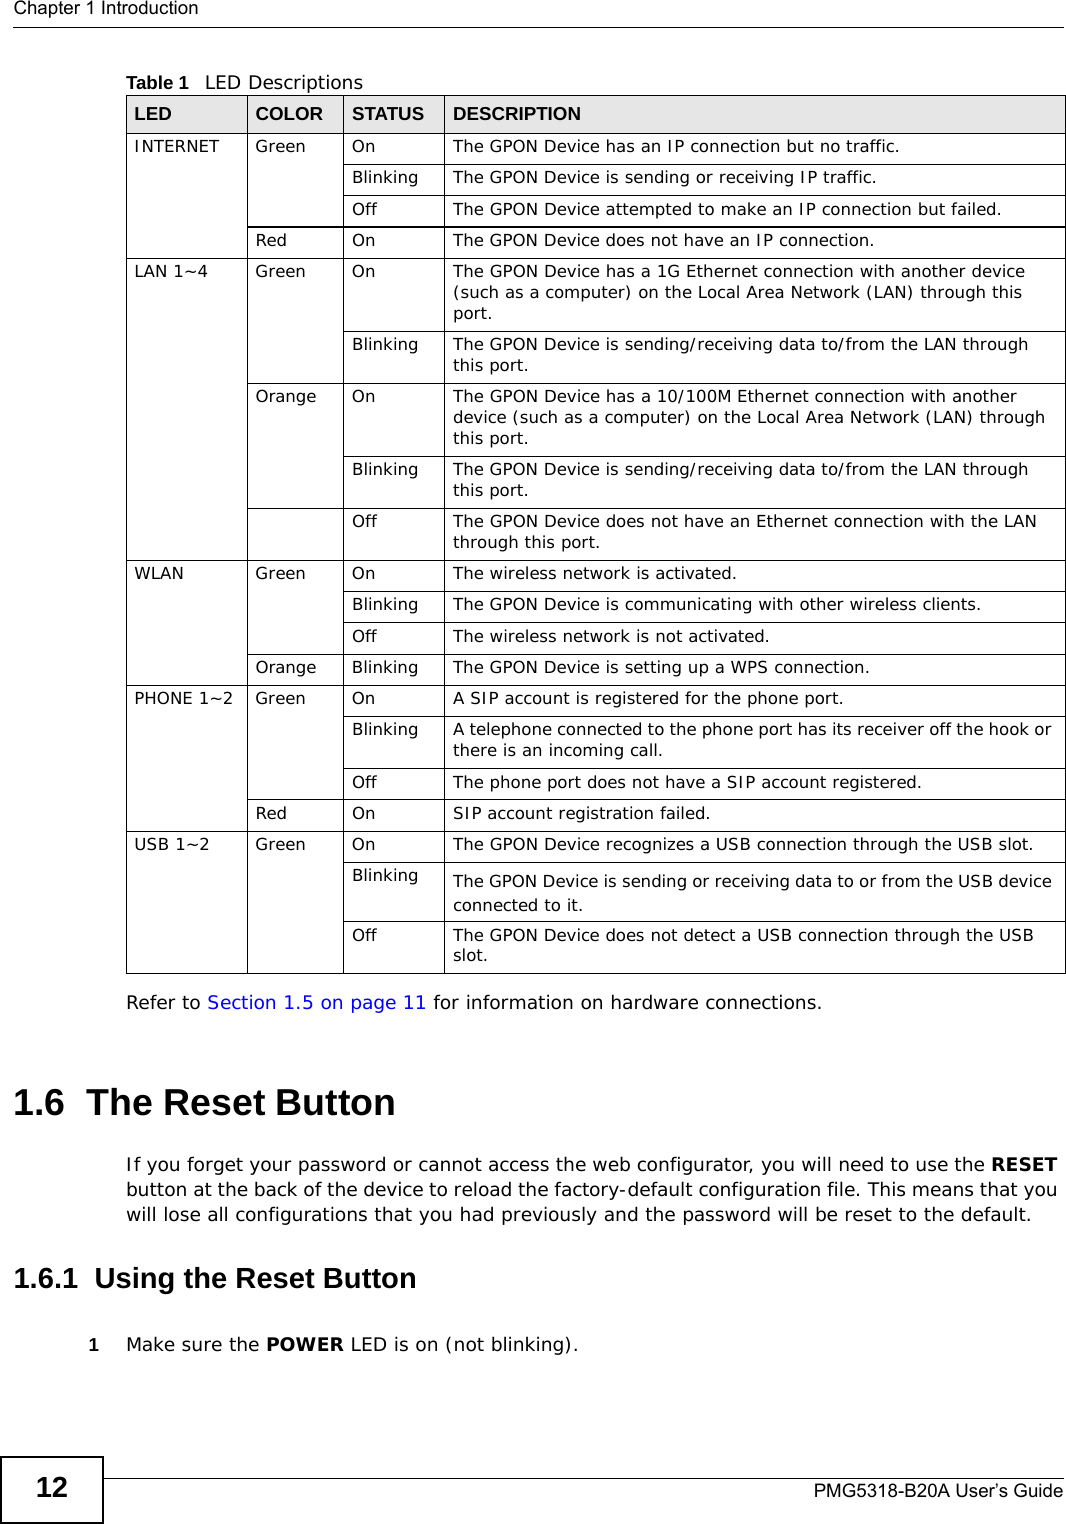 Chapter 1 IntroductionPMG5318-B20A User’s Guide12Refer to Section 1.5 on page 11 for information on hardware connections. 1.6  The Reset ButtonIf you forget your password or cannot access the web configurator, you will need to use the RESET button at the back of the device to reload the factory-default configuration file. This means that you will lose all configurations that you had previously and the password will be reset to the default.1.6.1  Using the Reset Button1Make sure the POWER LED is on (not blinking).INTERNET Green On The GPON Device has an IP connection but no traffic.Blinking The GPON Device is sending or receiving IP traffic.Off The GPON Device attempted to make an IP connection but failed.Red On The GPON Device does not have an IP connection.LAN 1~4 Green On The GPON Device has a 1G Ethernet connection with another device (such as a computer) on the Local Area Network (LAN) through this port.Blinking The GPON Device is sending/receiving data to/from the LAN through this port.Orange On The GPON Device has a 10/100M Ethernet connection with another device (such as a computer) on the Local Area Network (LAN) through this port.Blinking The GPON Device is sending/receiving data to/from the LAN through this port.Off The GPON Device does not have an Ethernet connection with the LAN through this port.WLAN Green On The wireless network is activated.Blinking The GPON Device is communicating with other wireless clients.Off The wireless network is not activated.Orange Blinking The GPON Device is setting up a WPS connection.PHONE 1~2 Green On A SIP account is registered for the phone port.Blinking A telephone connected to the phone port has its receiver off the hook or there is an incoming call.Off The phone port does not have a SIP account registered.Red On SIP account registration failed.USB 1~2 Green On The GPON Device recognizes a USB connection through the USB slot.Blinking The GPON Device is sending or receiving data to or from the USB device connected to it.Off The GPON Device does not detect a USB connection through the USB slot.Table 1   LED DescriptionsLED COLOR STATUS DESCRIPTION